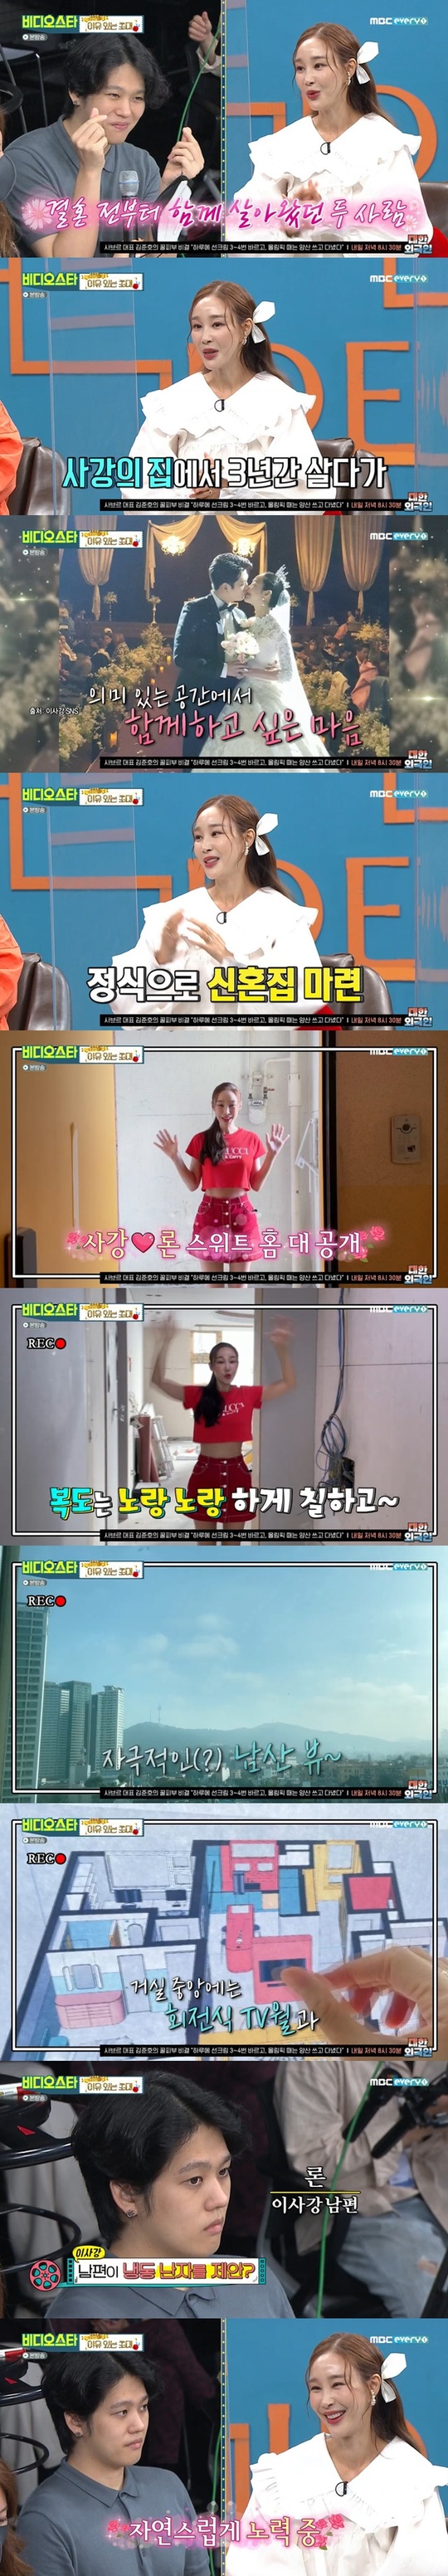 Director Health has released a generous Honeymoon home in four years of marriage, revealing the 11-year-old Husband Ron and the second-year-old plan.MBC Everlons Video Star, which aired on September 14, featured singer Kim Jang-hoon, CF director Director Health, Gag Woman Mirage, former baseball player Lee Dae-hyung, rapper Kisum and influencer Frisia.Director Health said that Marriage seemed to be ruined at the time of his first appearance in Video Star four years ago in 2017, but his love after the broadcast progressed and he appeared in the second appearance two years later with his 11-year-old Husband Ron and his marriage report before the marriage ceremony. Marriage and Husband went to the army and will be discharged tomorrow.Im newly married again after being discharged. Ive spent all the important moments of my life with Video Star, he said.When Ron, who was in the role of manager of his wife Director Health, asked Ron, Do you have a plan for the second year? Ron replied, I am working hard. Director Health also said, Husbands answer is embarrassing but hard. Please go somewhere else and do it, he said.Director Health then said that he had a Honeymoon home in the fourth year of marriage. I lived together as an unofficial cohabitation.When I was dating, I moved out and did not talk to my parents. In the early days, I lived with my loved ones and gathered hard from then on and moved.I will send you a self-cam shot. The Honeymoon home in Director Health is still under construction. Director Health shows the house under construction and says, This is the train view, Yongsan Station.The living room is Namsan View, he said, showing a drawing that boasts a colorful color, and explaining that it will be a very stimulating space when completed.Director Health followed the disadvantage of marriage, saying, I got eczema at home in a sweaty summer, and Mirage said, Our couple can not touch in the summer.I sleep at 10 degrees Celsius in the winter. I havent felt my skin in summer. After Chuseok, I hold my hands.I am holding my birthday in Husband in November, and I will hold it in December and hold it back. Park asked the question about frozen eggs, saying, Did Ron suggest that he freeze the egg? Director Health replied, I hope that it will happen quickly by telling me to try and plan what the sky gives me naturally.Mirage also joked that he did not intend to freeze the egg, saying, I am thinking about frozen dumplings.